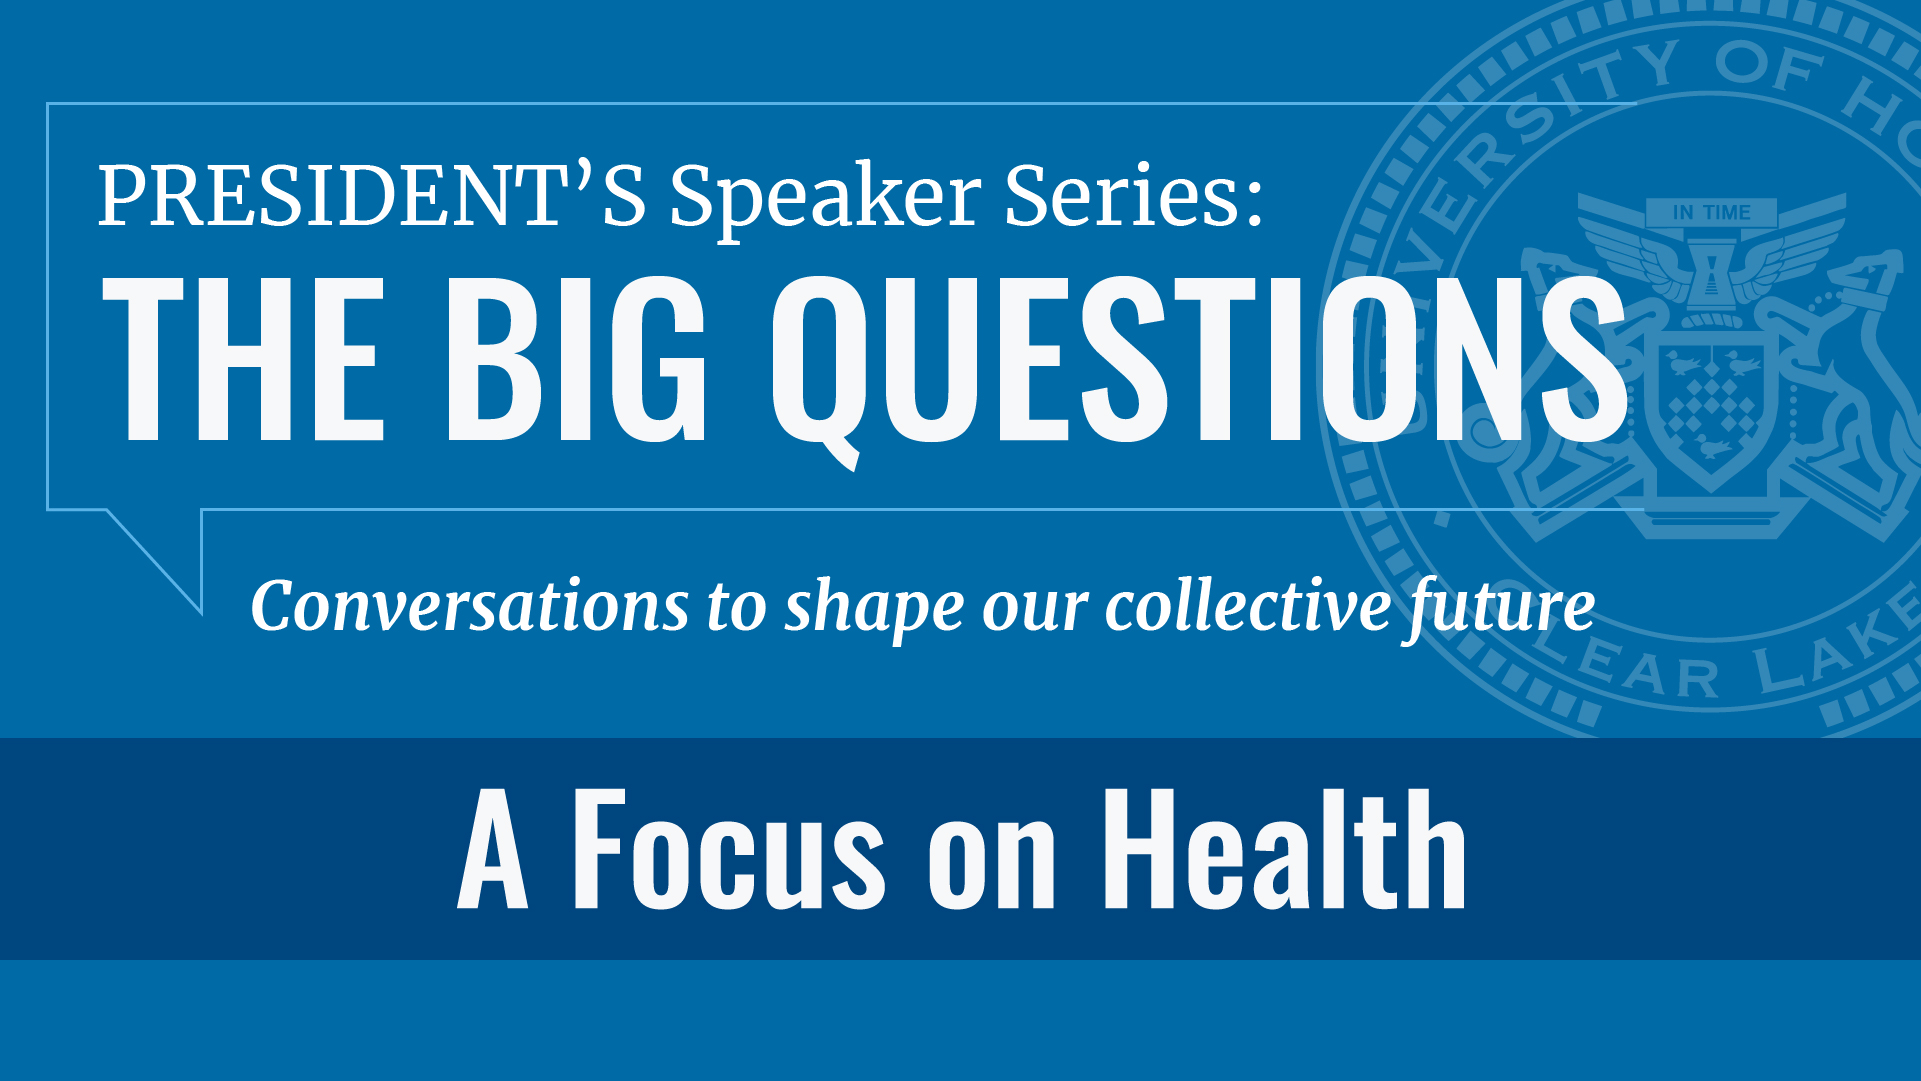 President's Speaker Series: The Big Questions. Conversations to shape our collective future. How do we prepare for the future of higher education?